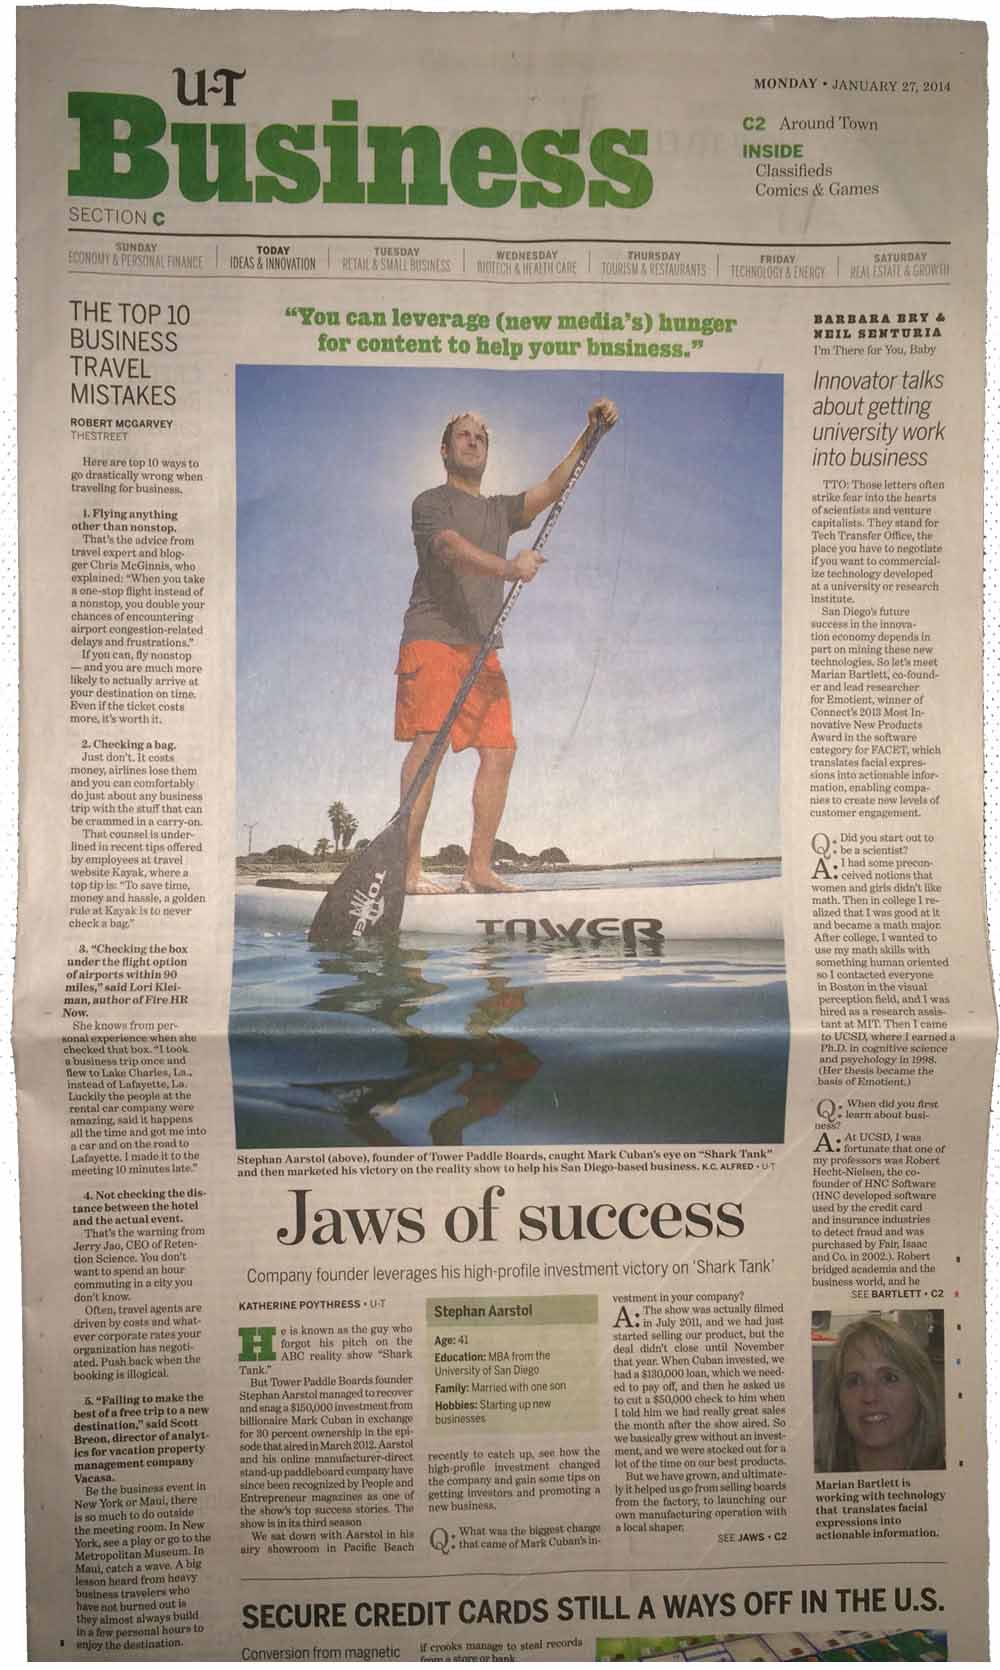 Tower Paddle Boards Featured in the San Diego Union Tribune